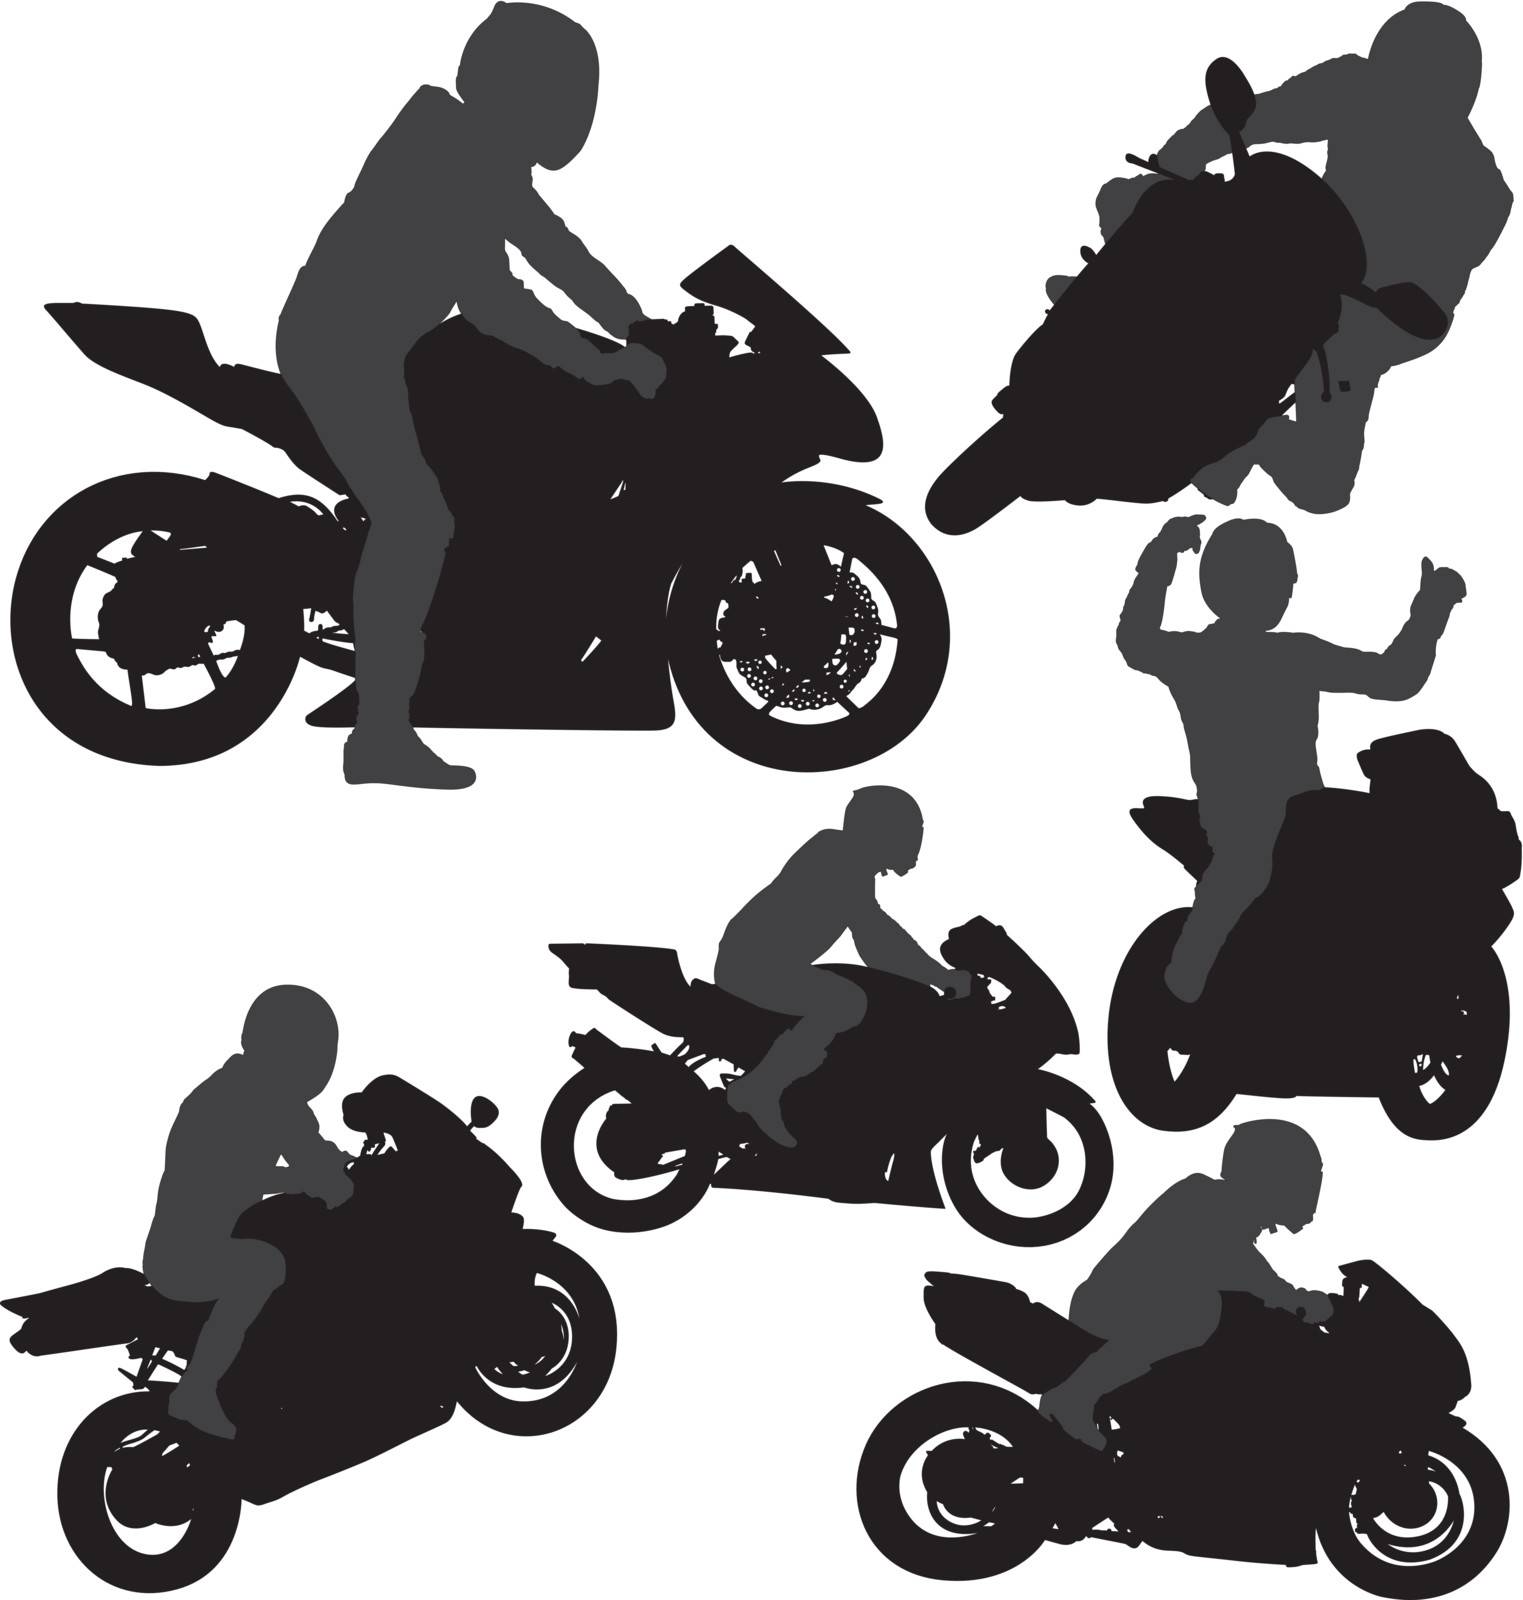 Motorcycle rider silhouettes set. Layered and fully editable